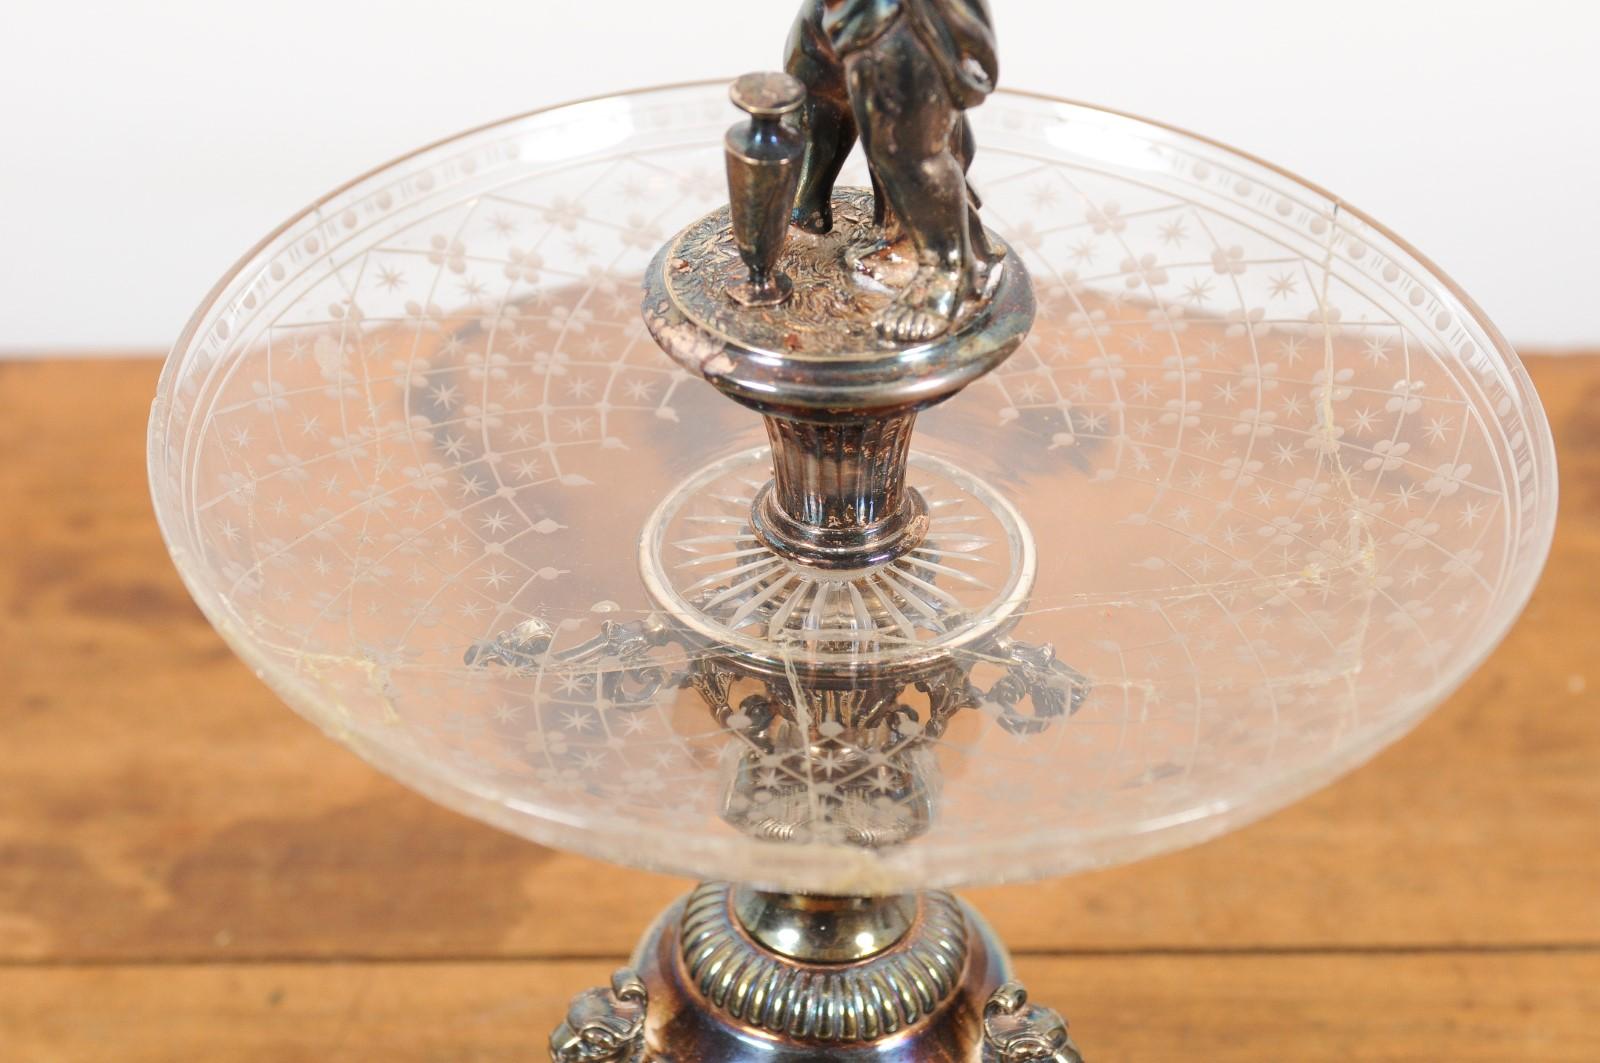 French Napoléon III 1850s Silver Epergne with Putto and Mythical Creatures 6